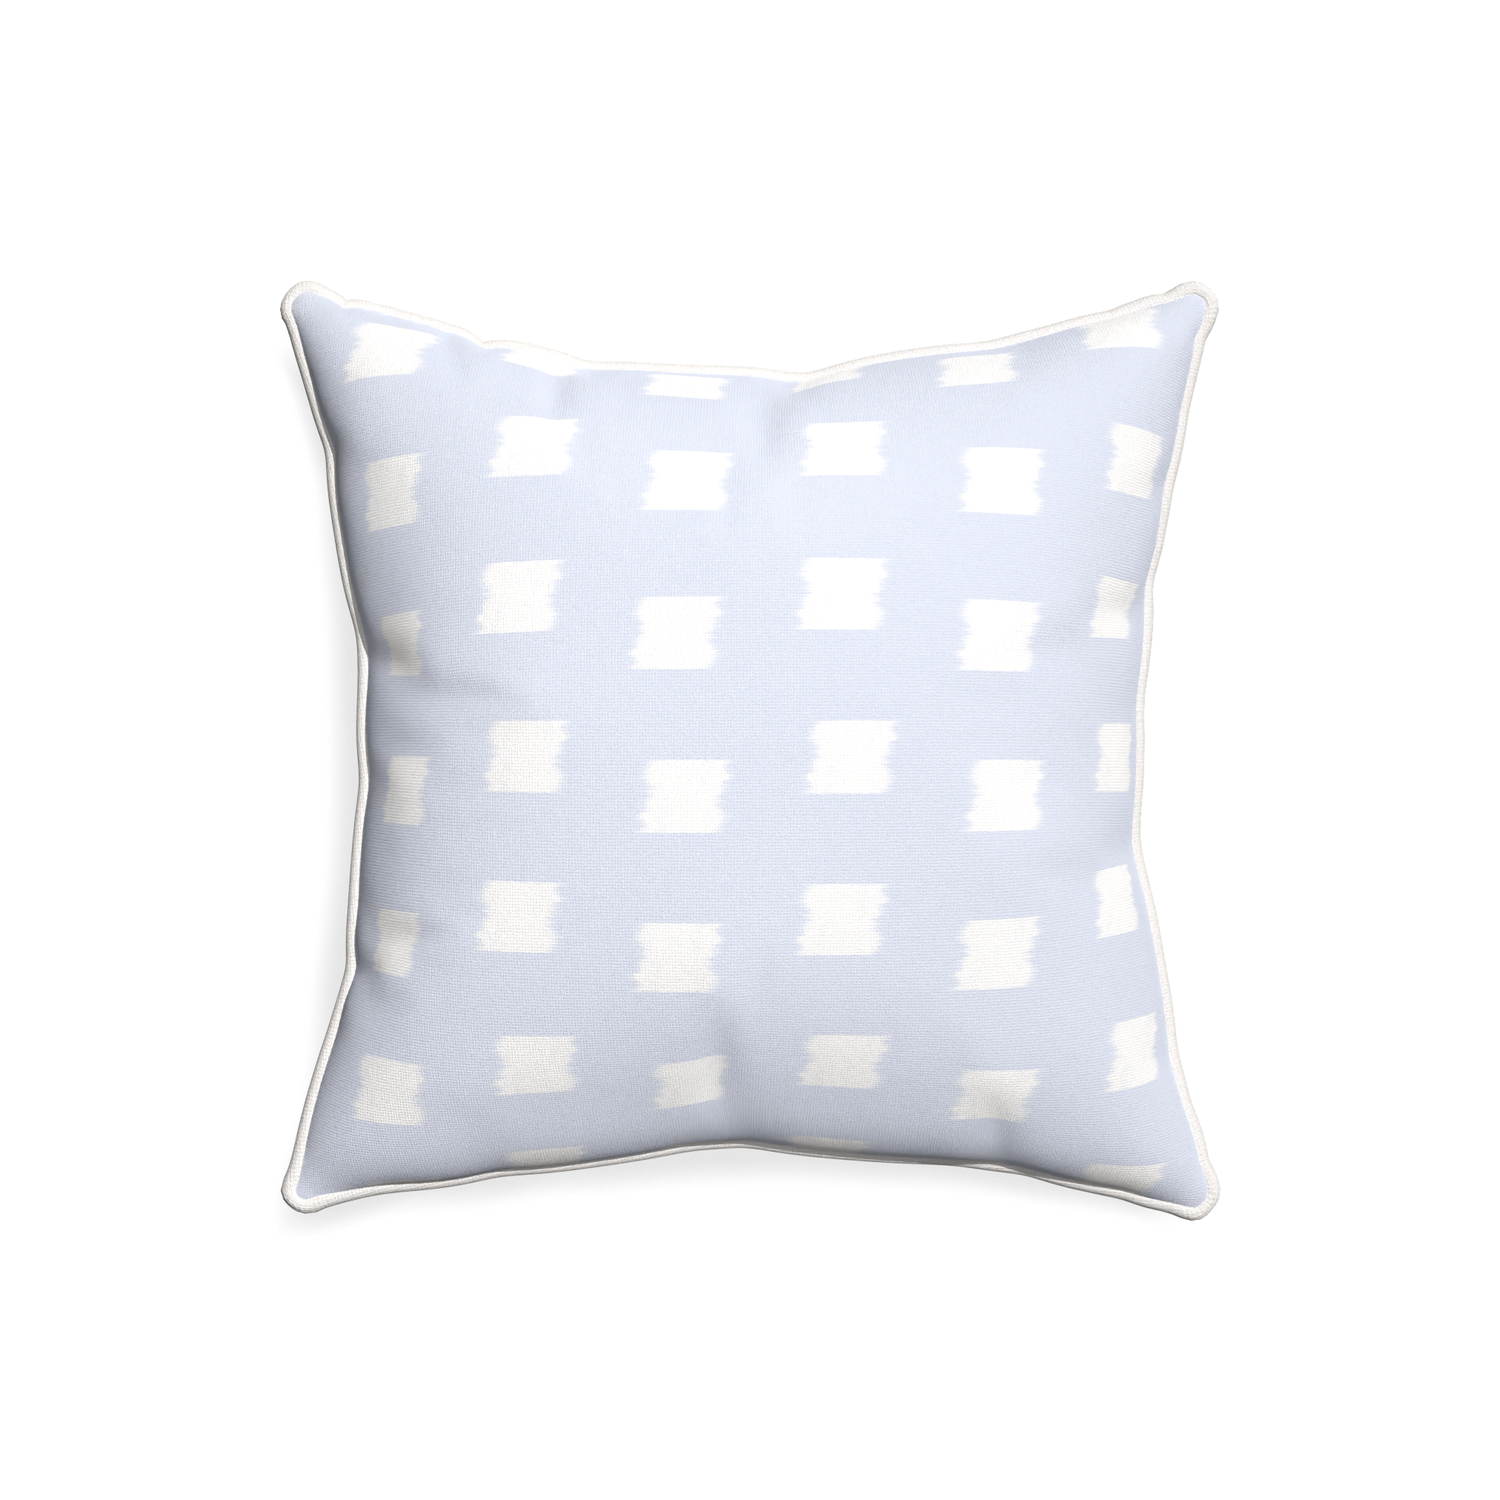 20-square denton custom sky blue patternpillow with snow piping on white background